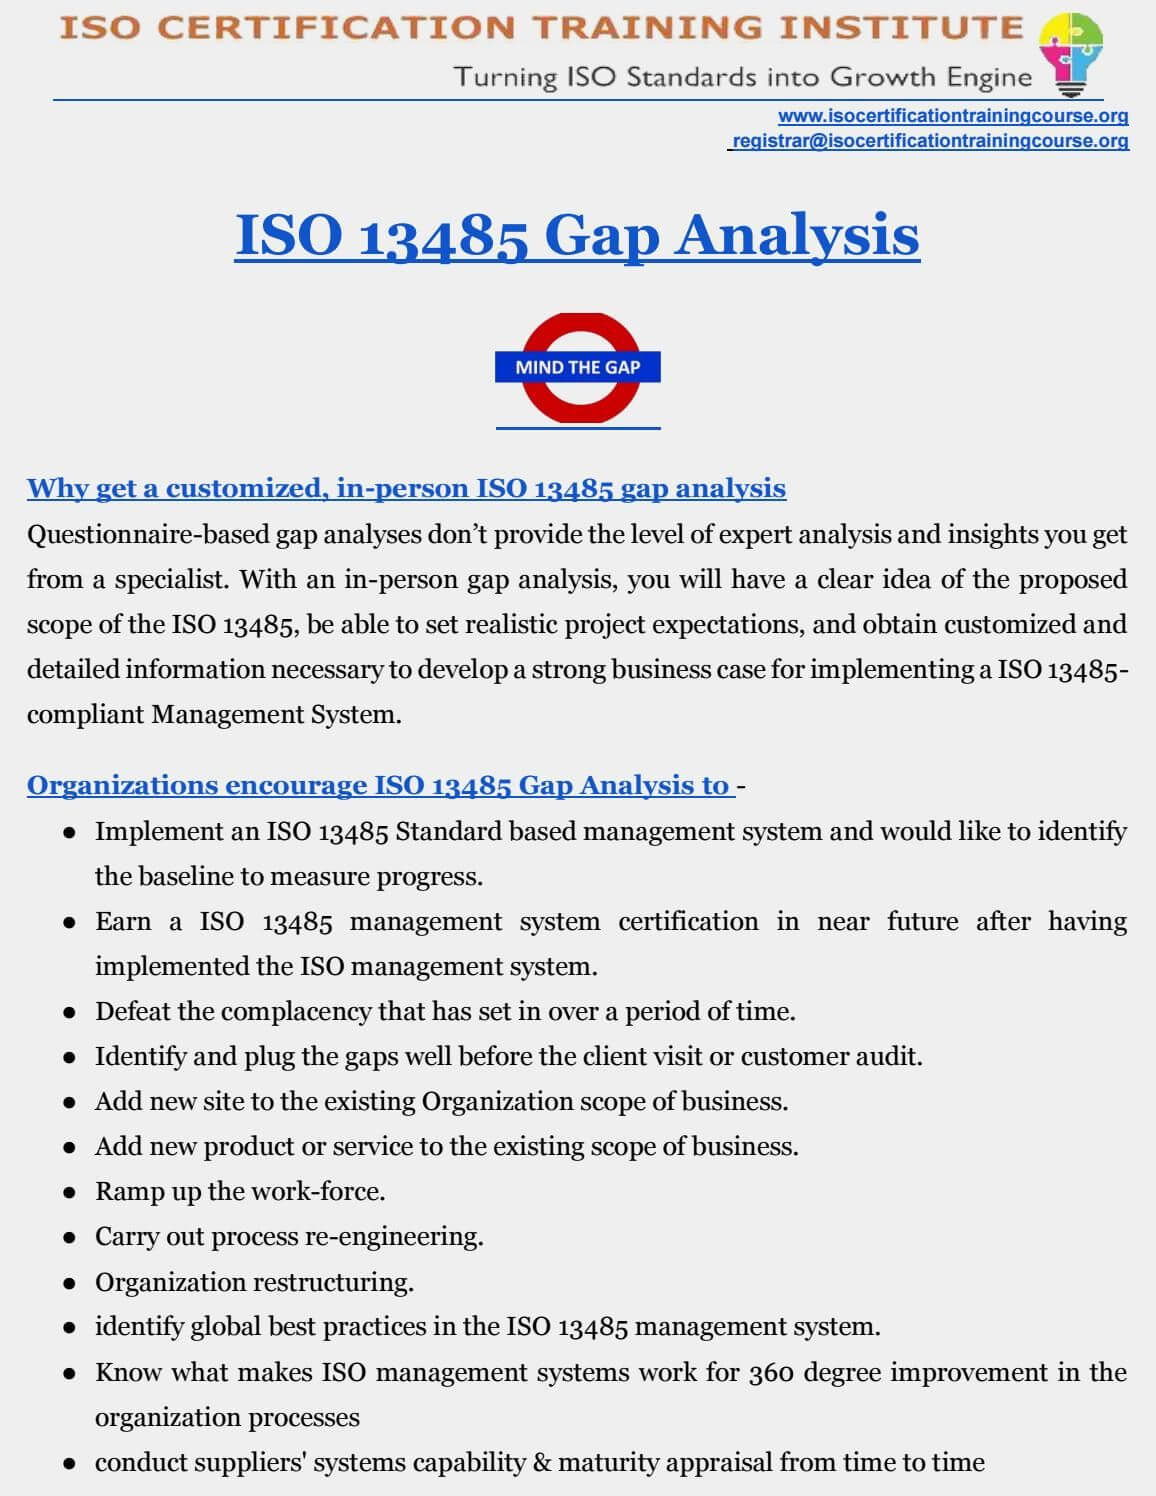 Gap Analysis | Health, Safety, Risk Management Strategies For Pci Dss Gap Analysis Report Template